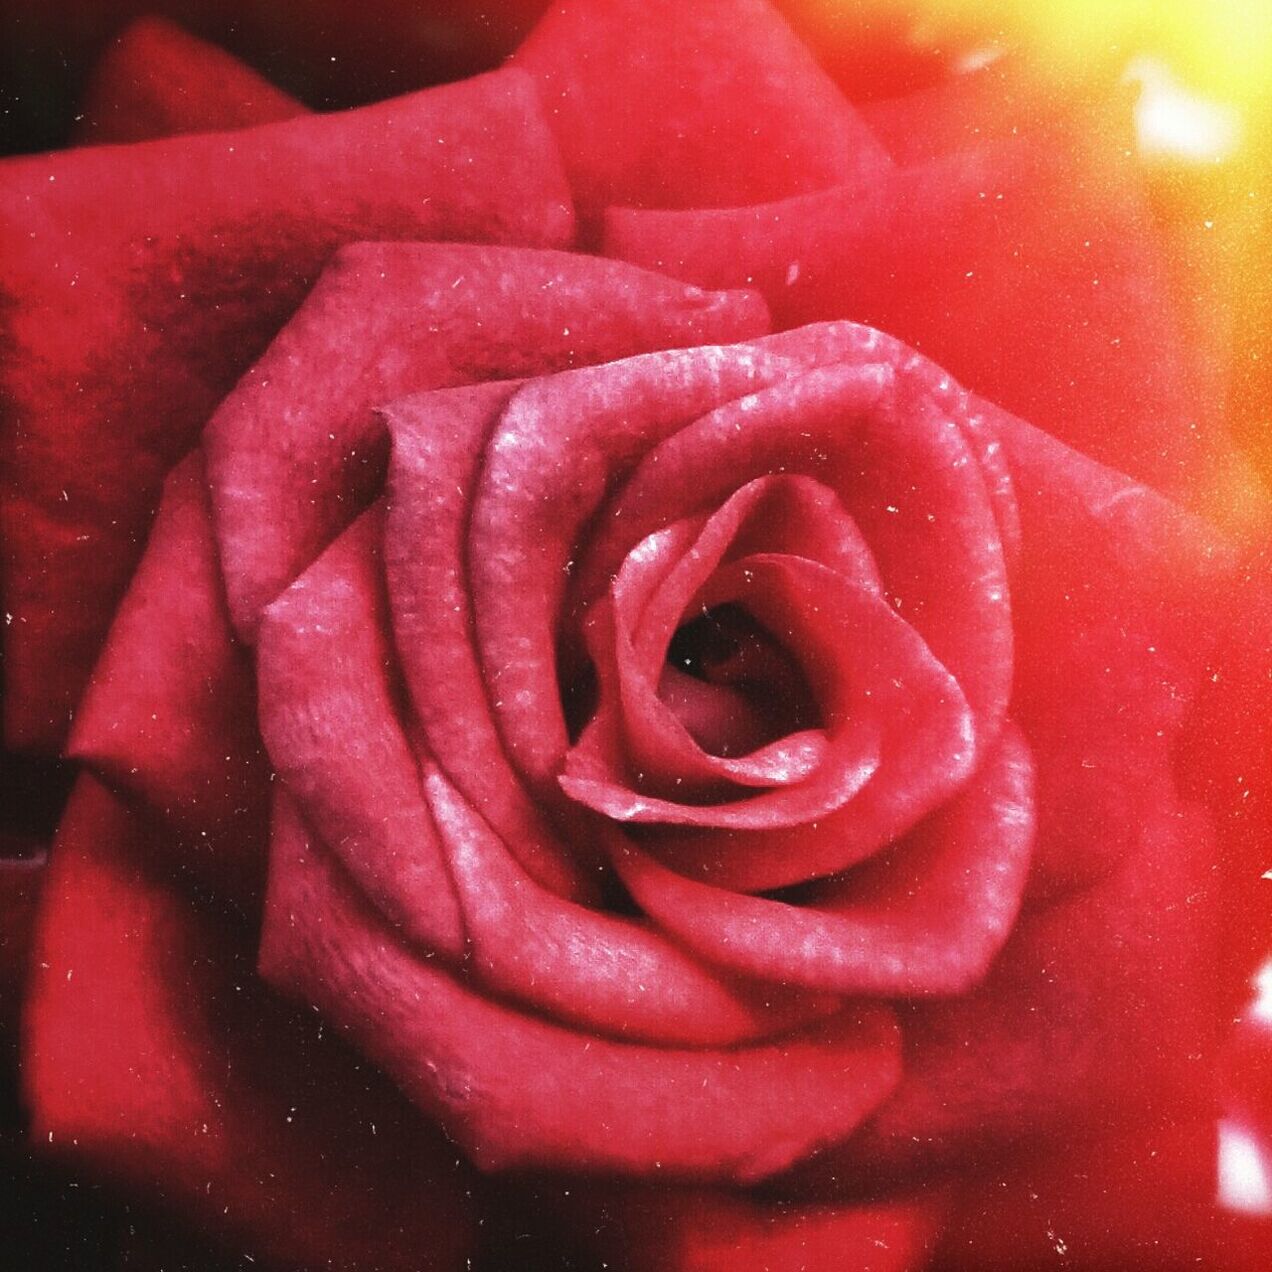 Extreme close up of red rose